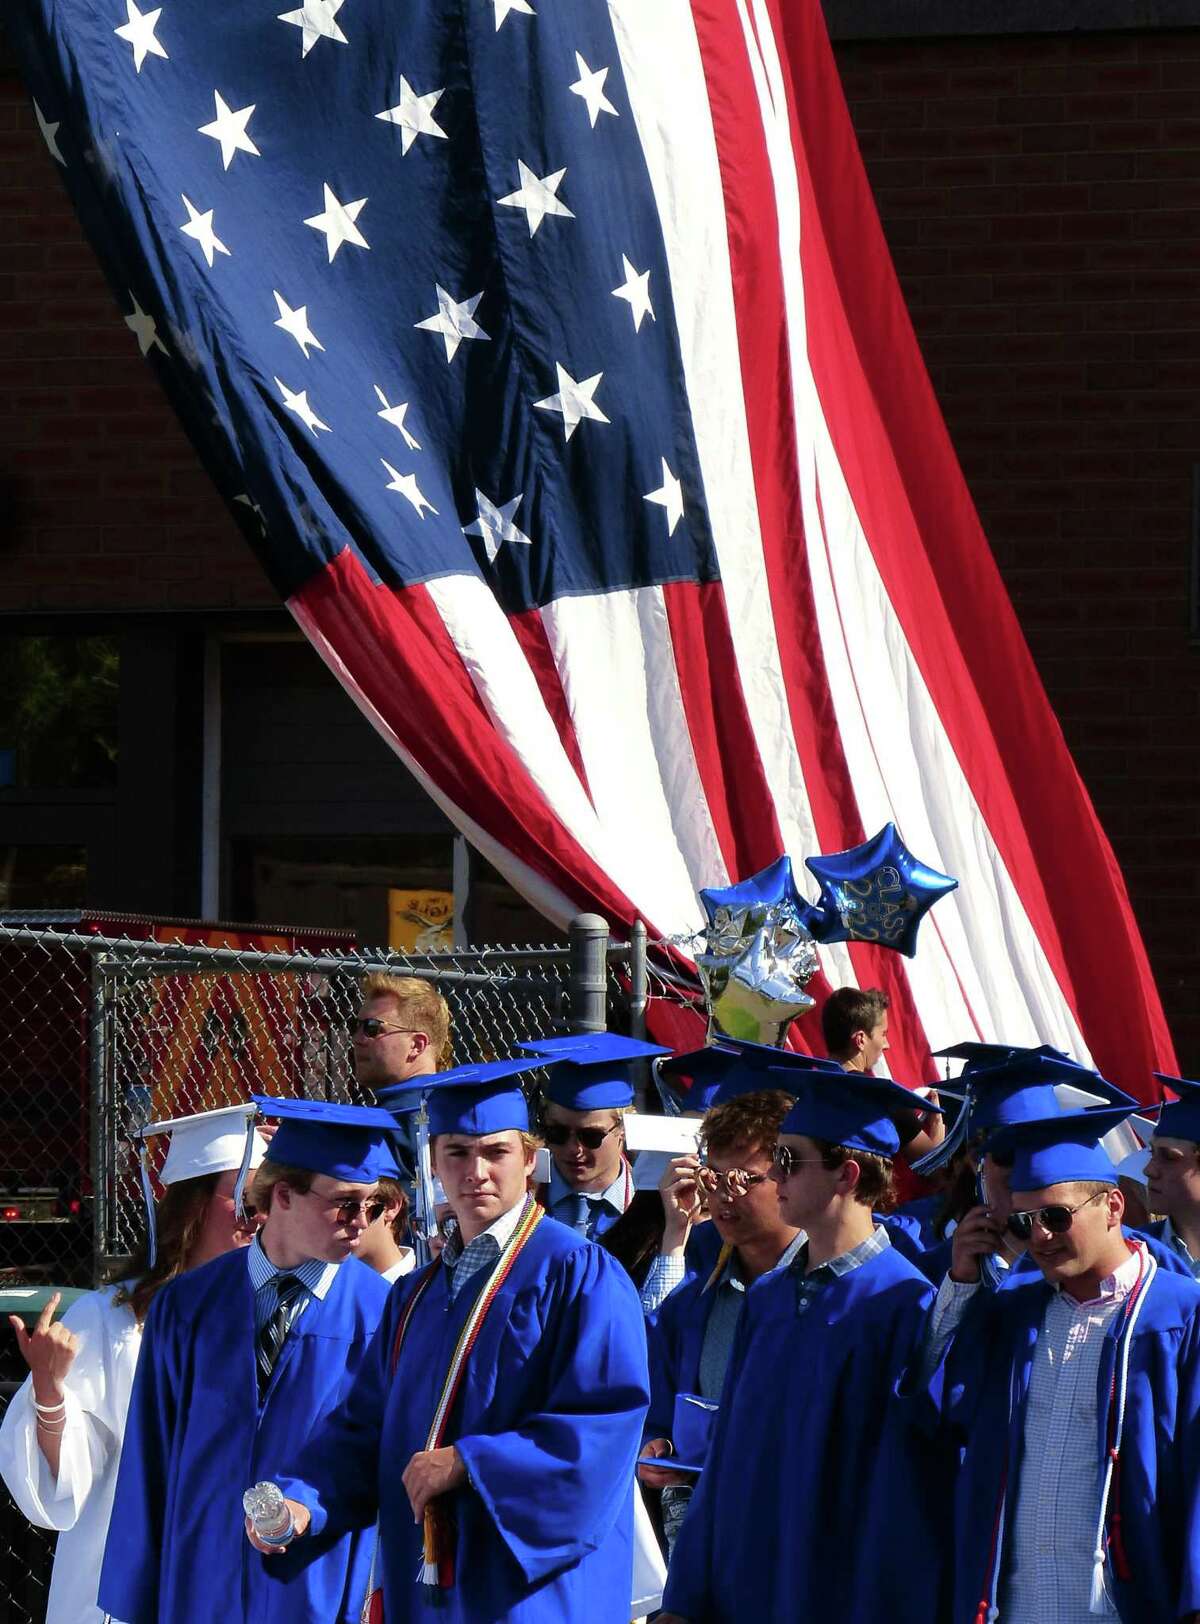 The US flag flies from a Darien fire truck as graduates file in at the start of Darien High School's Class of 2022 Commencement Program in Darien, Conn., on Friday June 17, 2022.